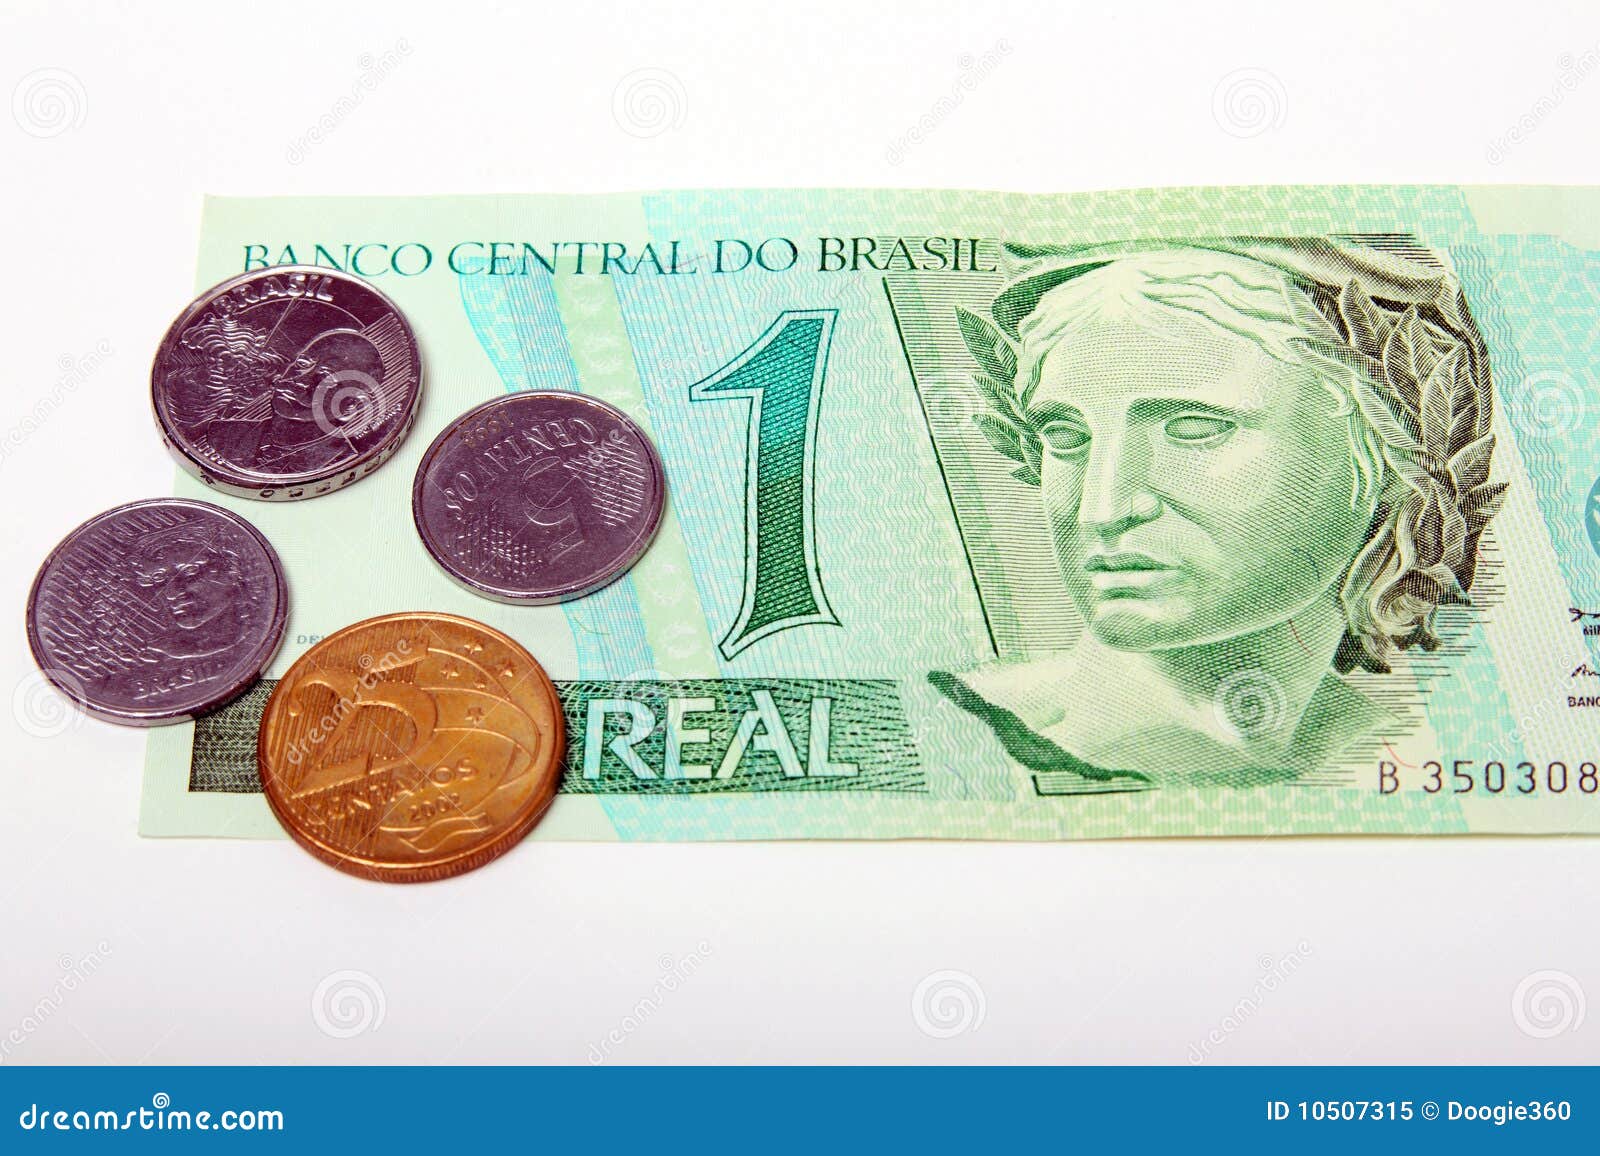 brazil reais currency paper bill and coins